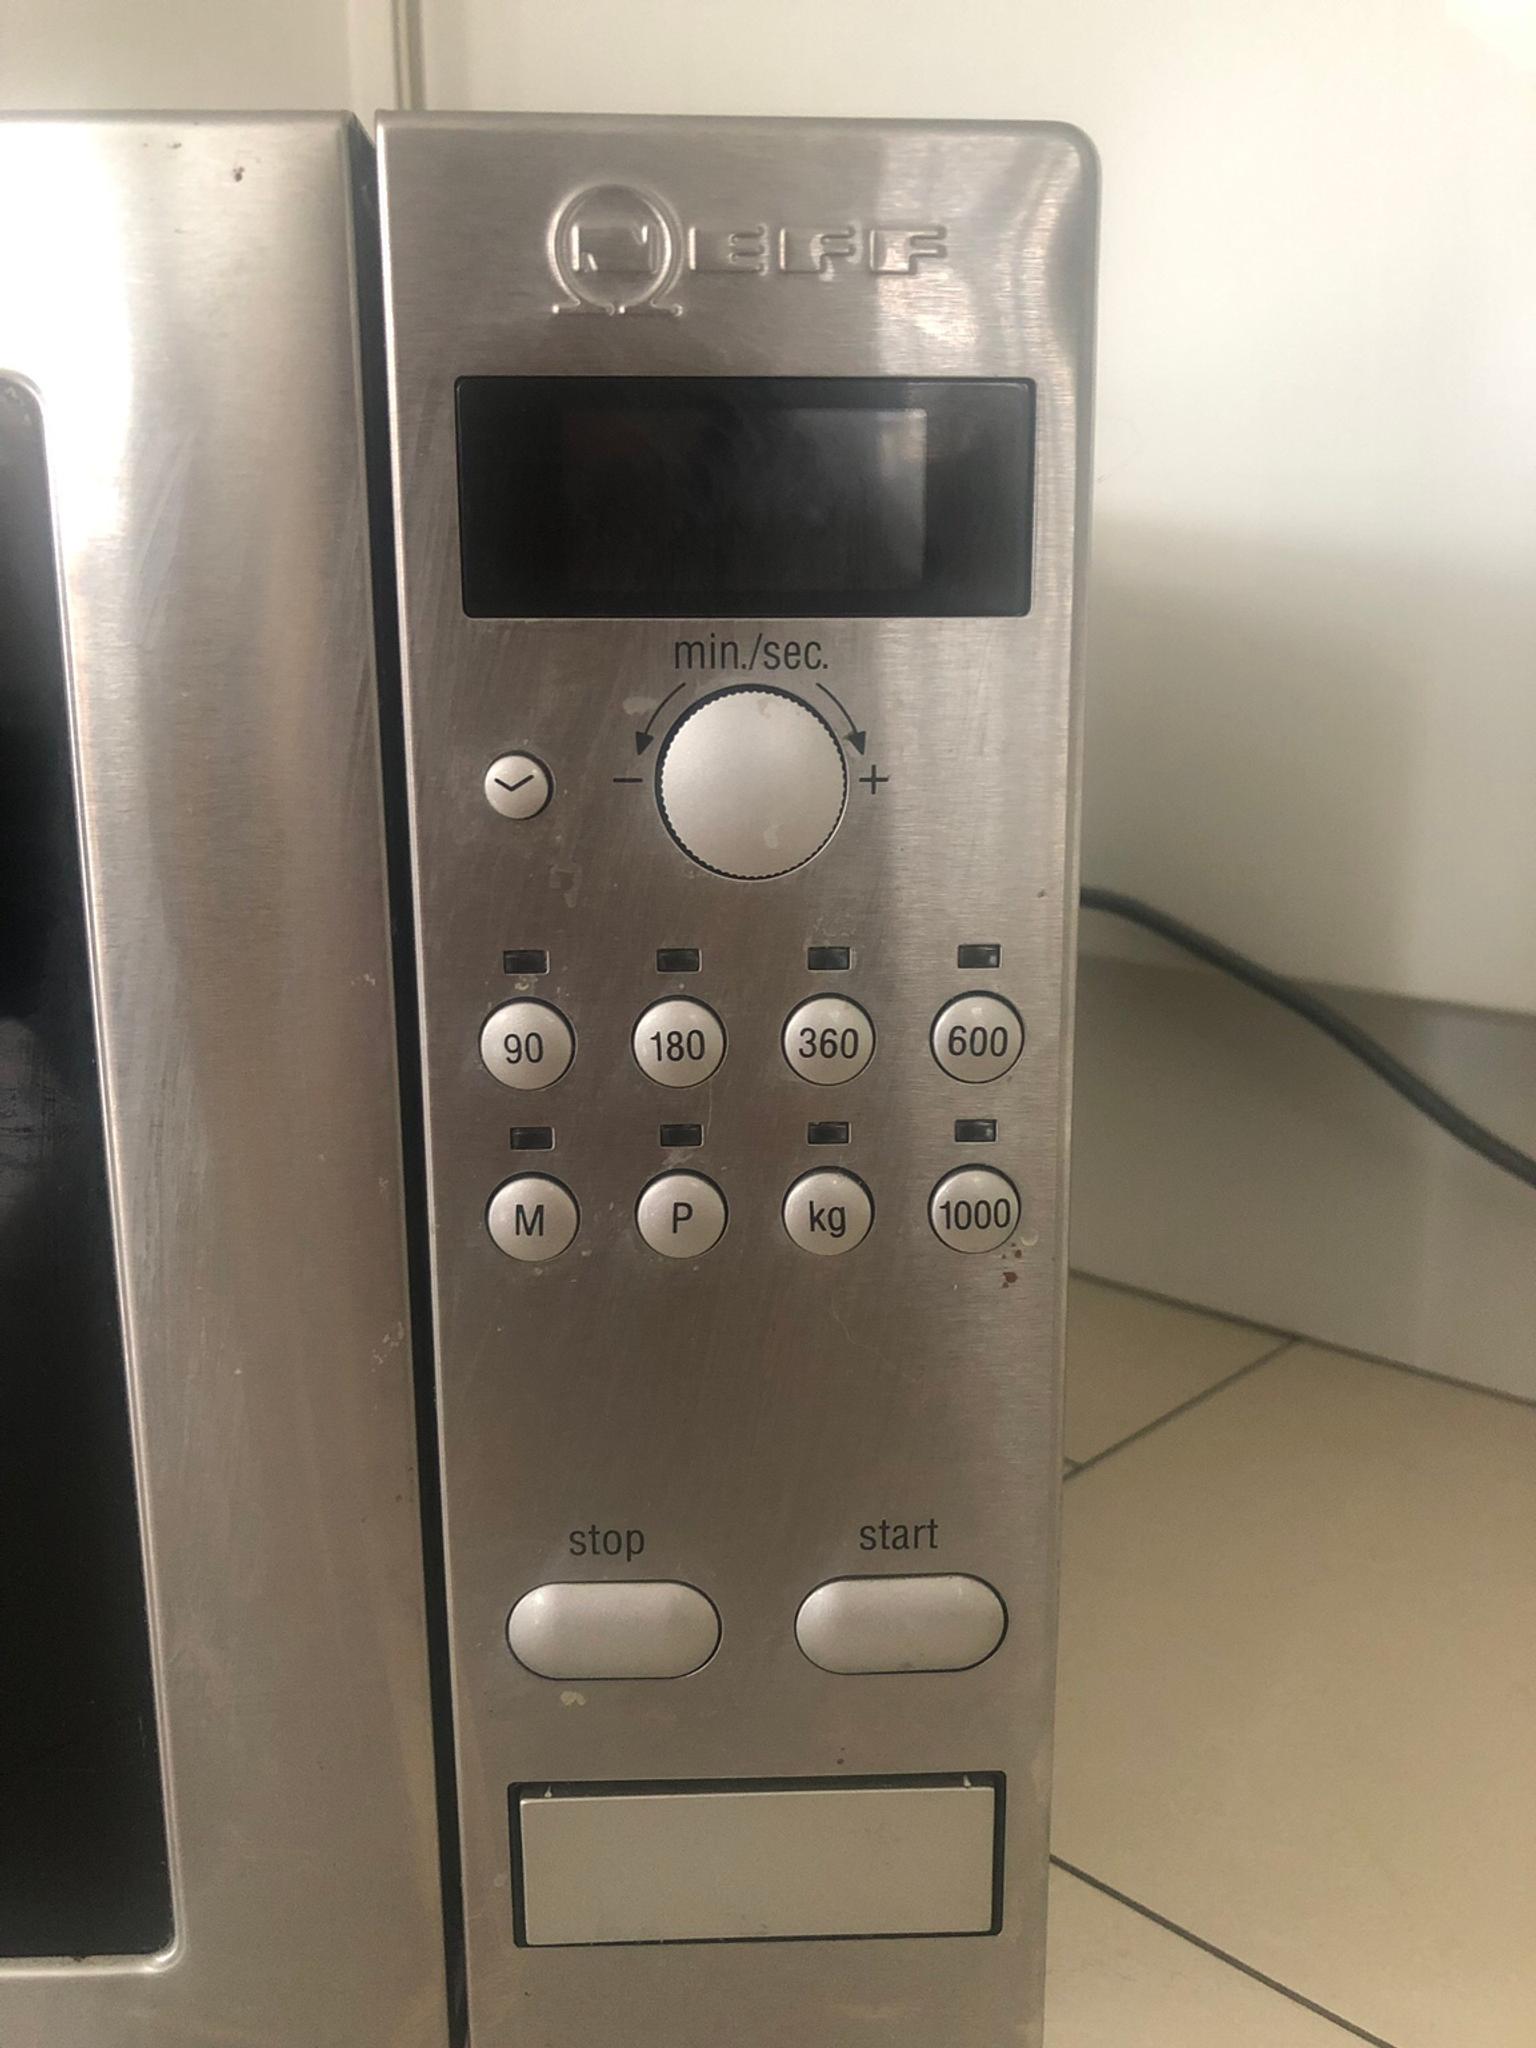 NEFF microwave in DY1 Dudley for £15.00 for sale | Shpock